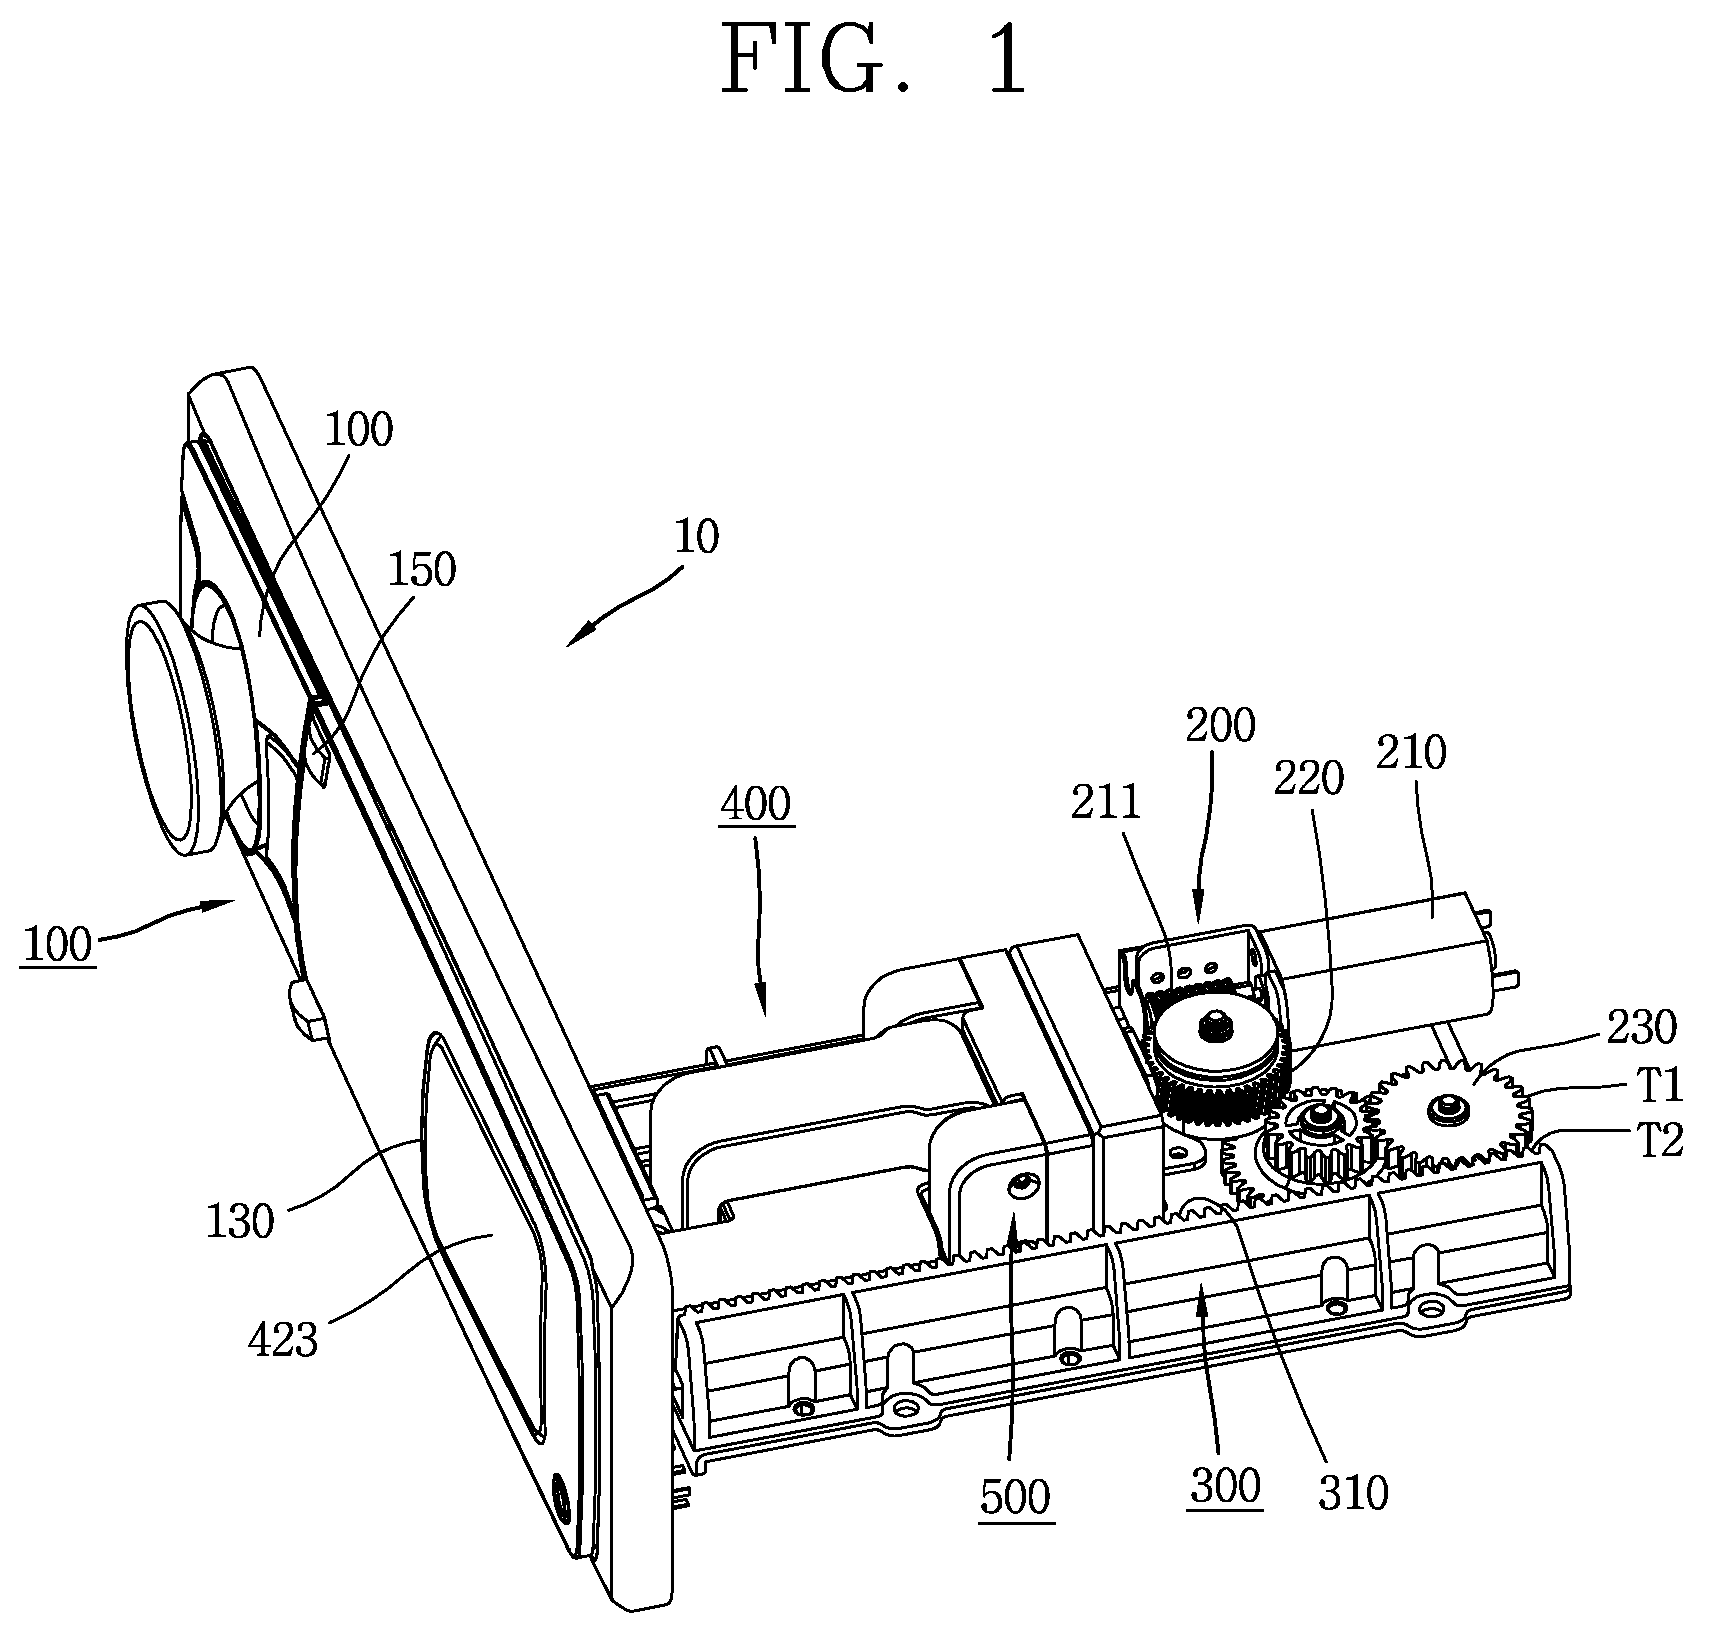 Stationary apparatus for portable electronic device